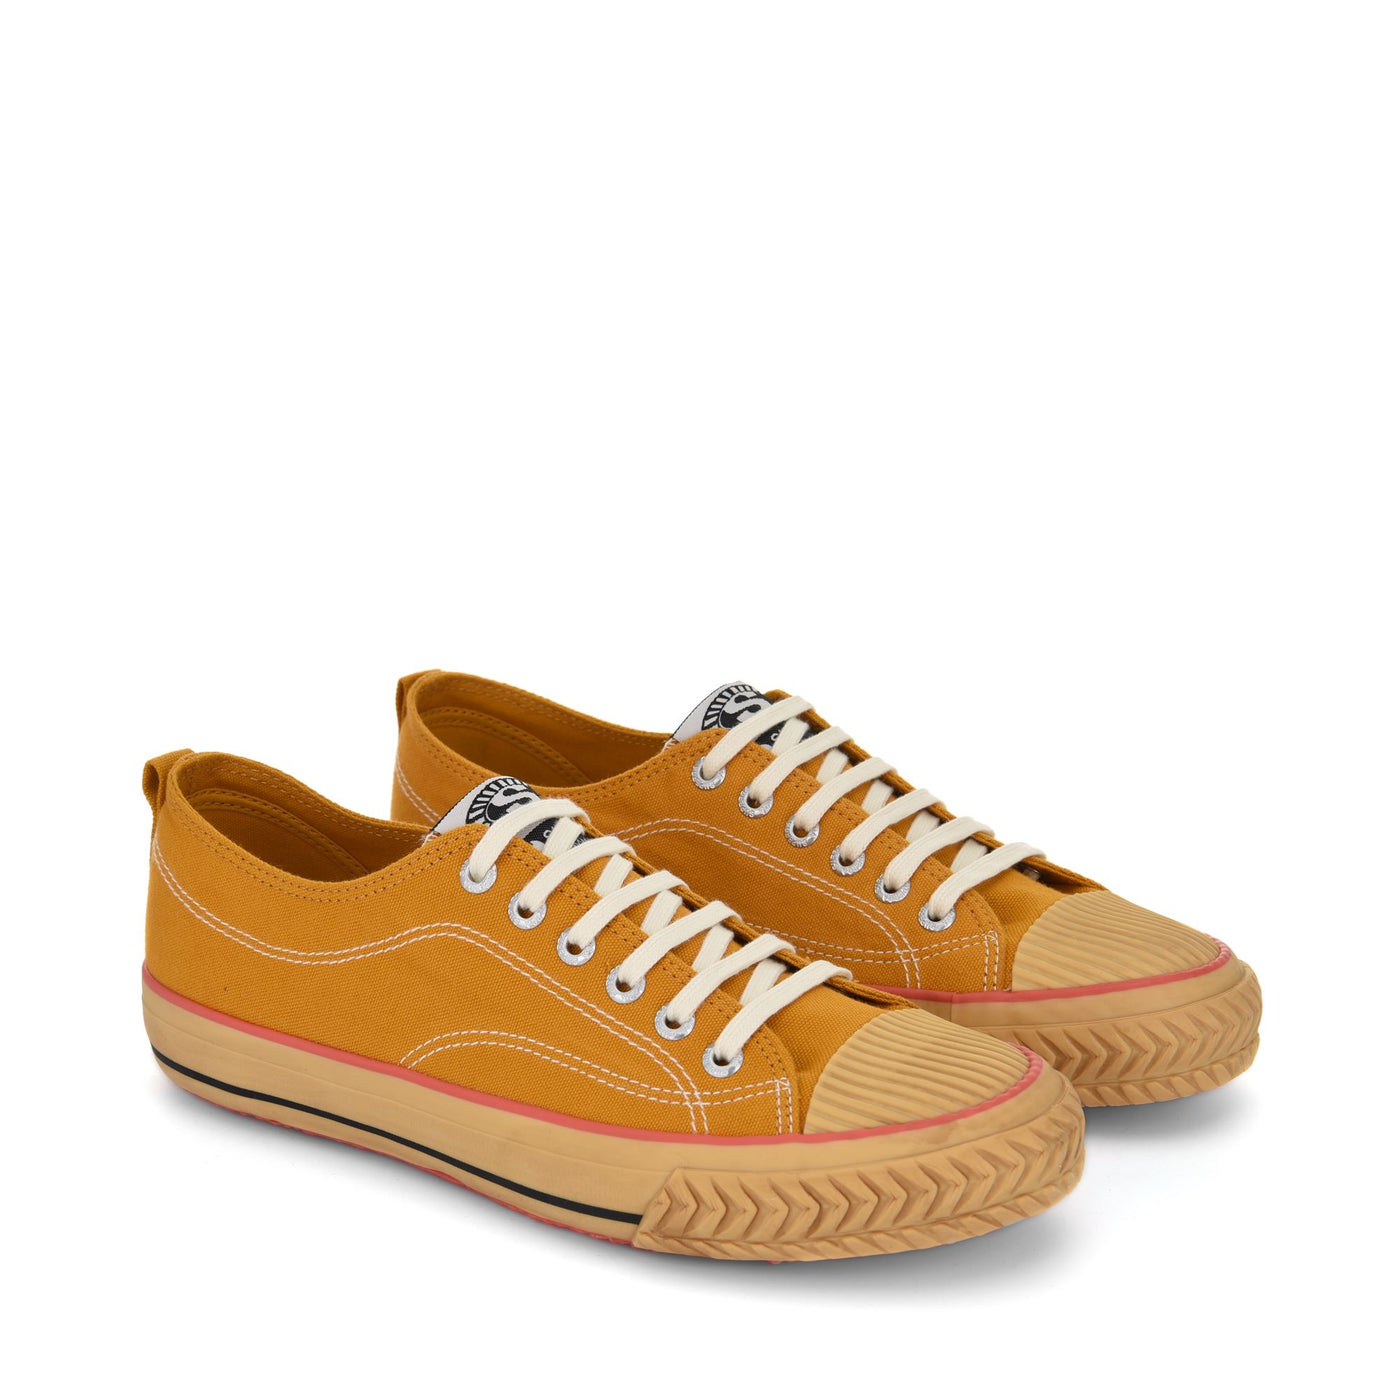 Sneakers Unisex 289 COLLEGE Low Cut YELLOW GOLDEN Dressed Front (jpg Rgb)	